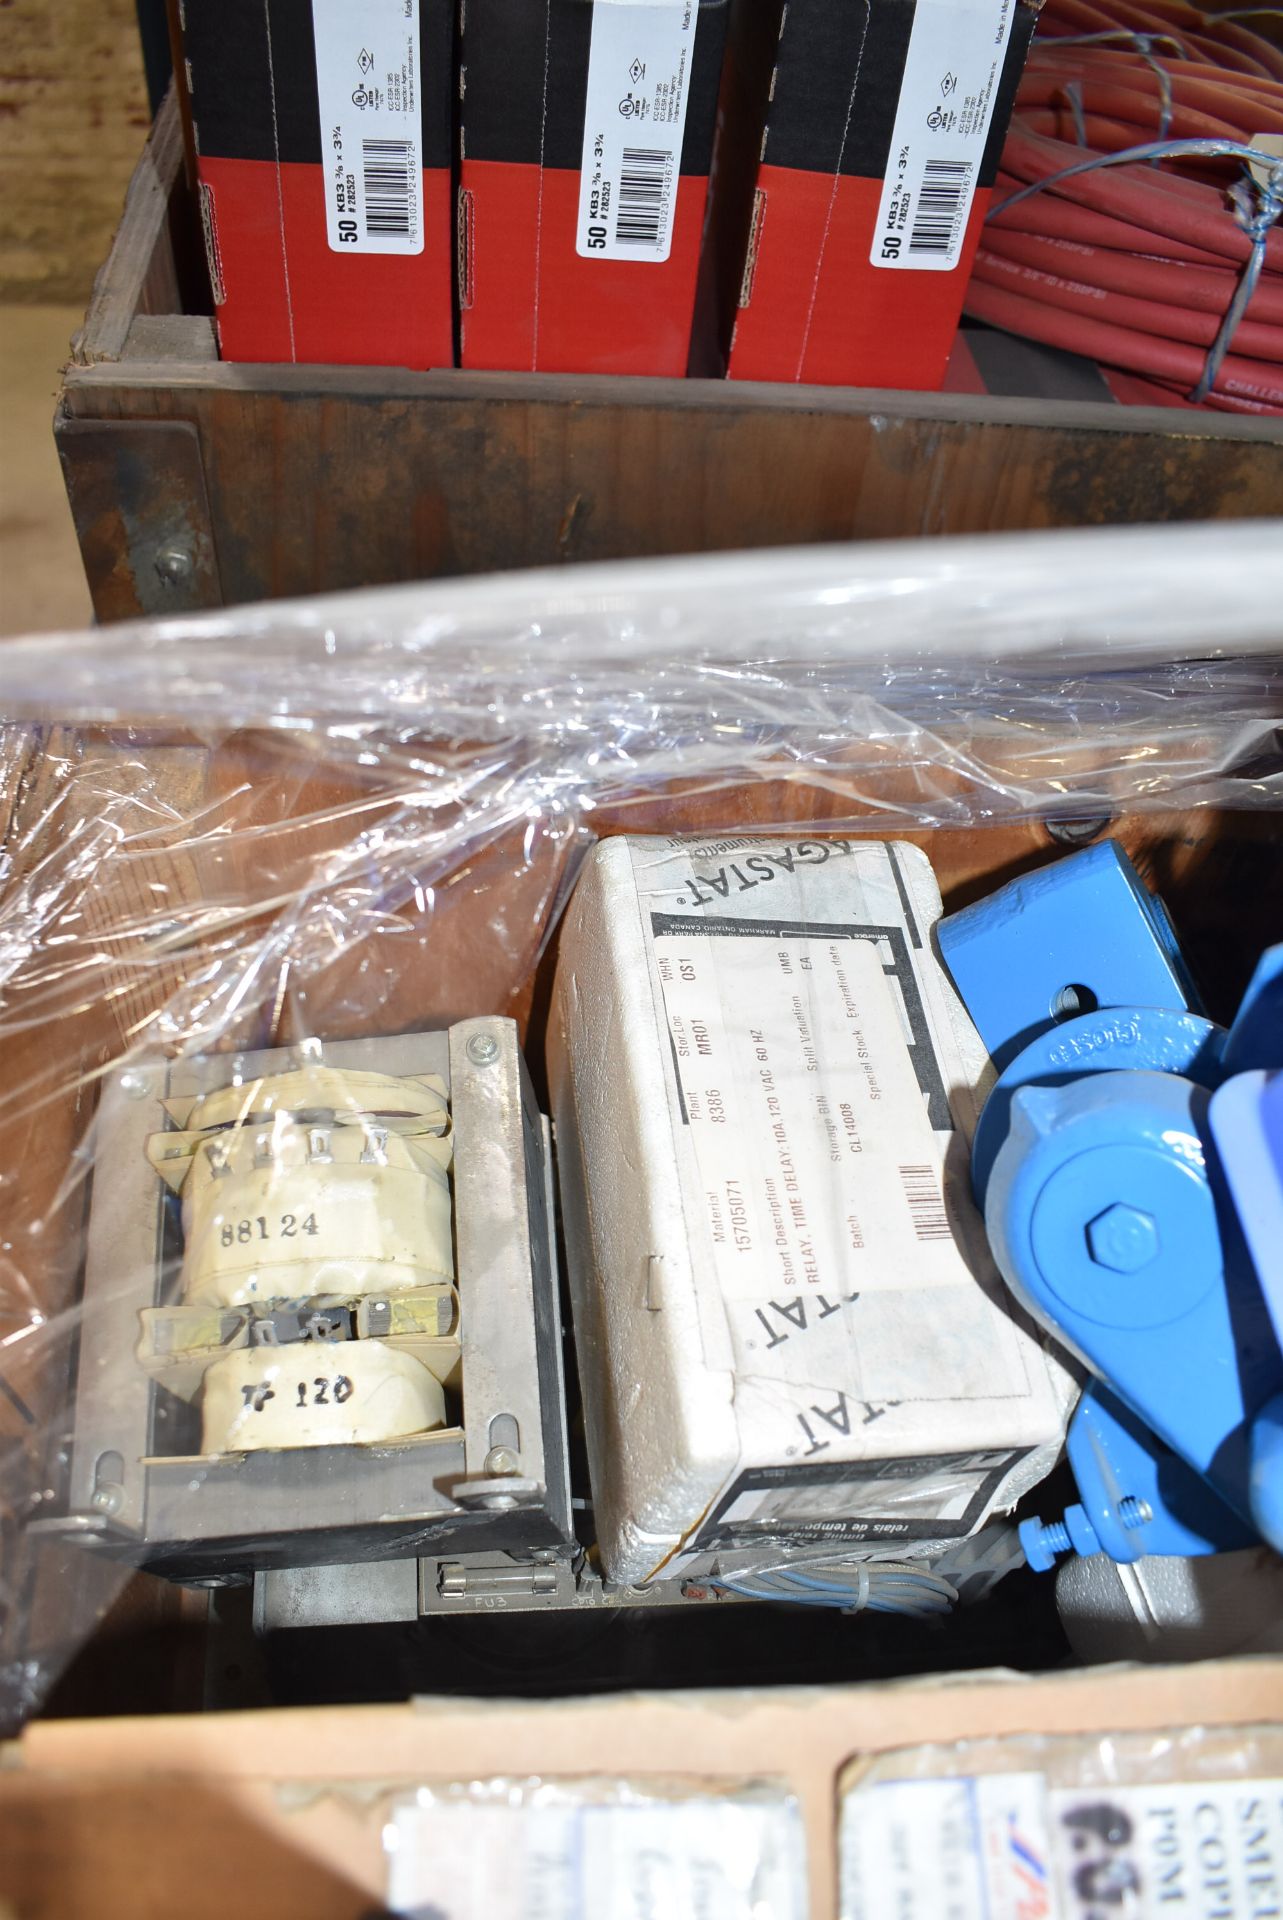 LOT/ CRATE WITH SPARE PARTS CONSISTING OF SPROCKETS, PULLEYS, SHAFTS, SOLENOIDS, RELAYS, PRESSURE - Image 9 of 9